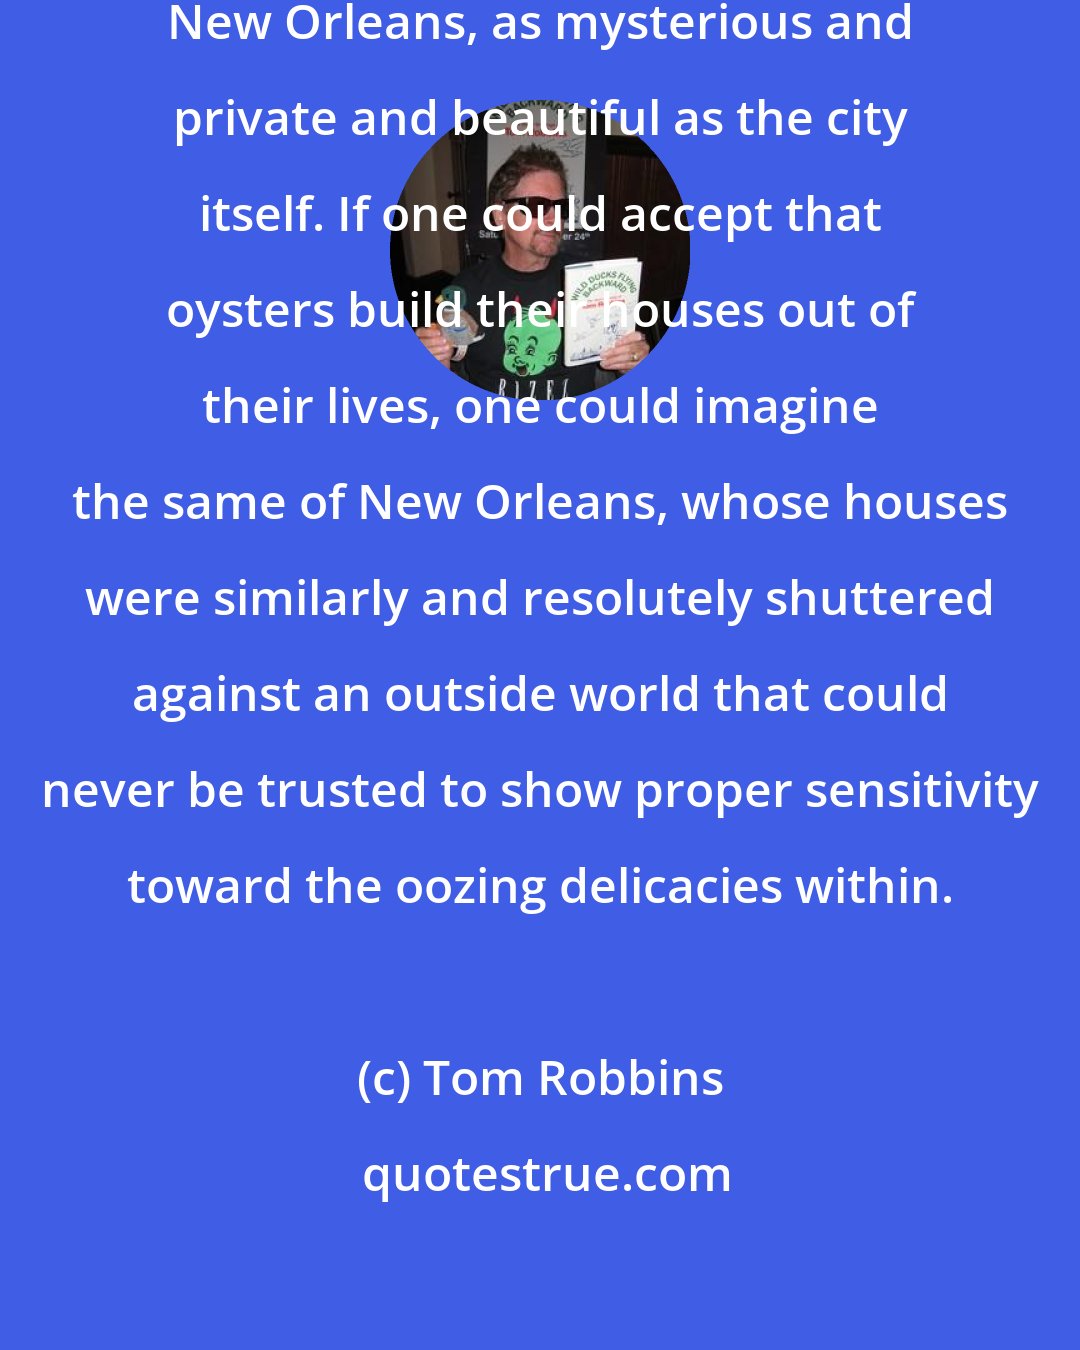 Tom Robbins: The oyster was an animal worthy of New Orleans, as mysterious and private and beautiful as the city itself. If one could accept that oysters build their houses out of their lives, one could imagine the same of New Orleans, whose houses were similarly and resolutely shuttered against an outside world that could never be trusted to show proper sensitivity toward the oozing delicacies within.